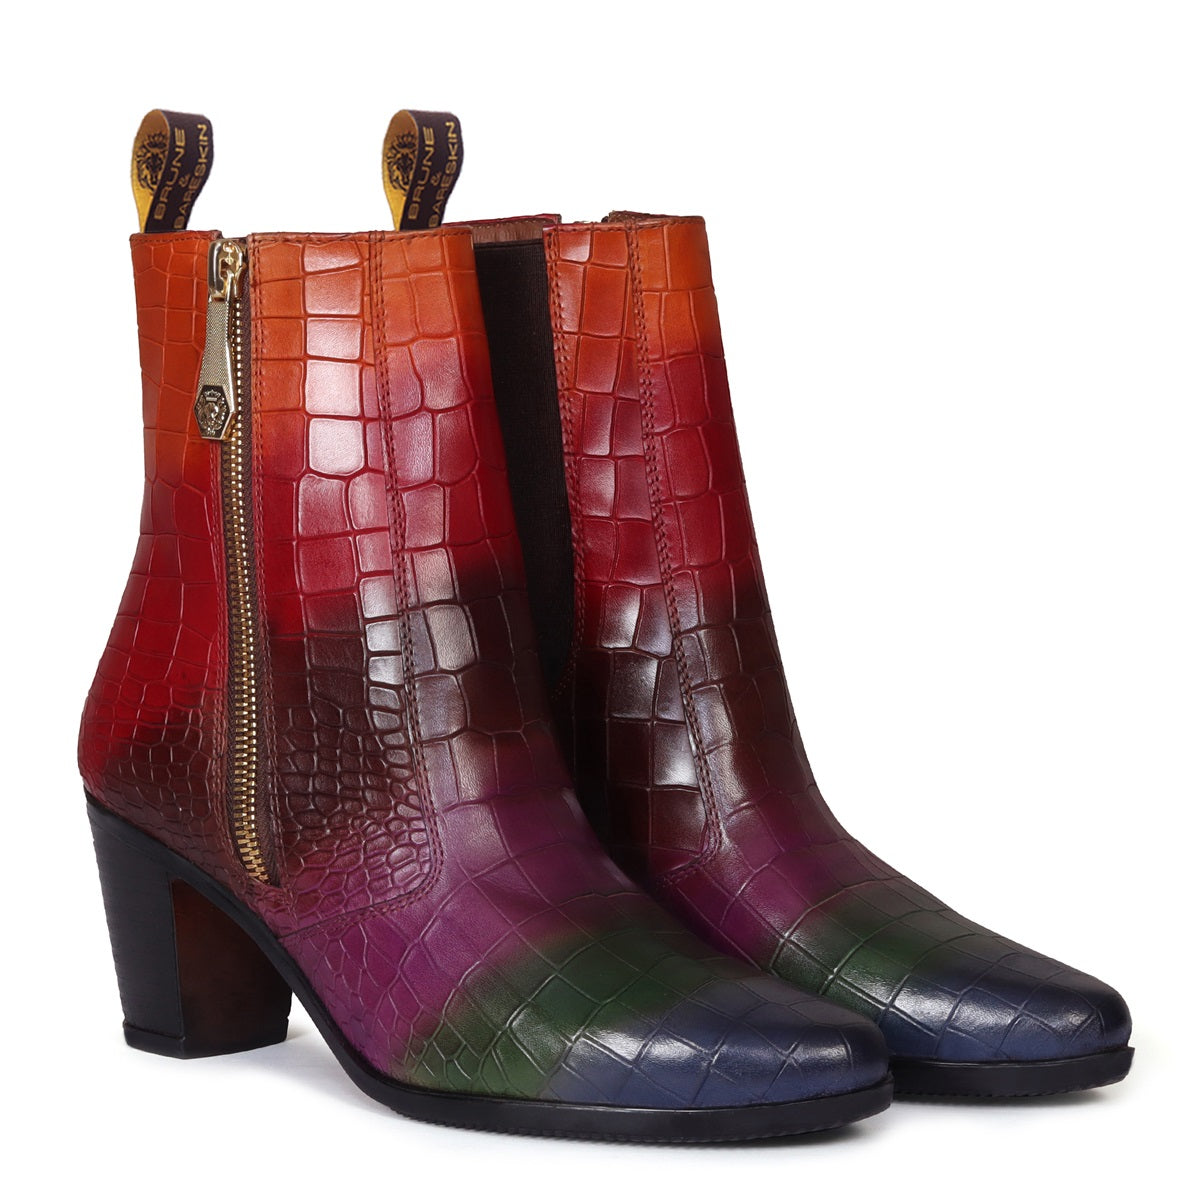 Multi Colored Ladies Boot With Zip Closure in Deep Cut Croco Textured Leather by Brune & Bareskin